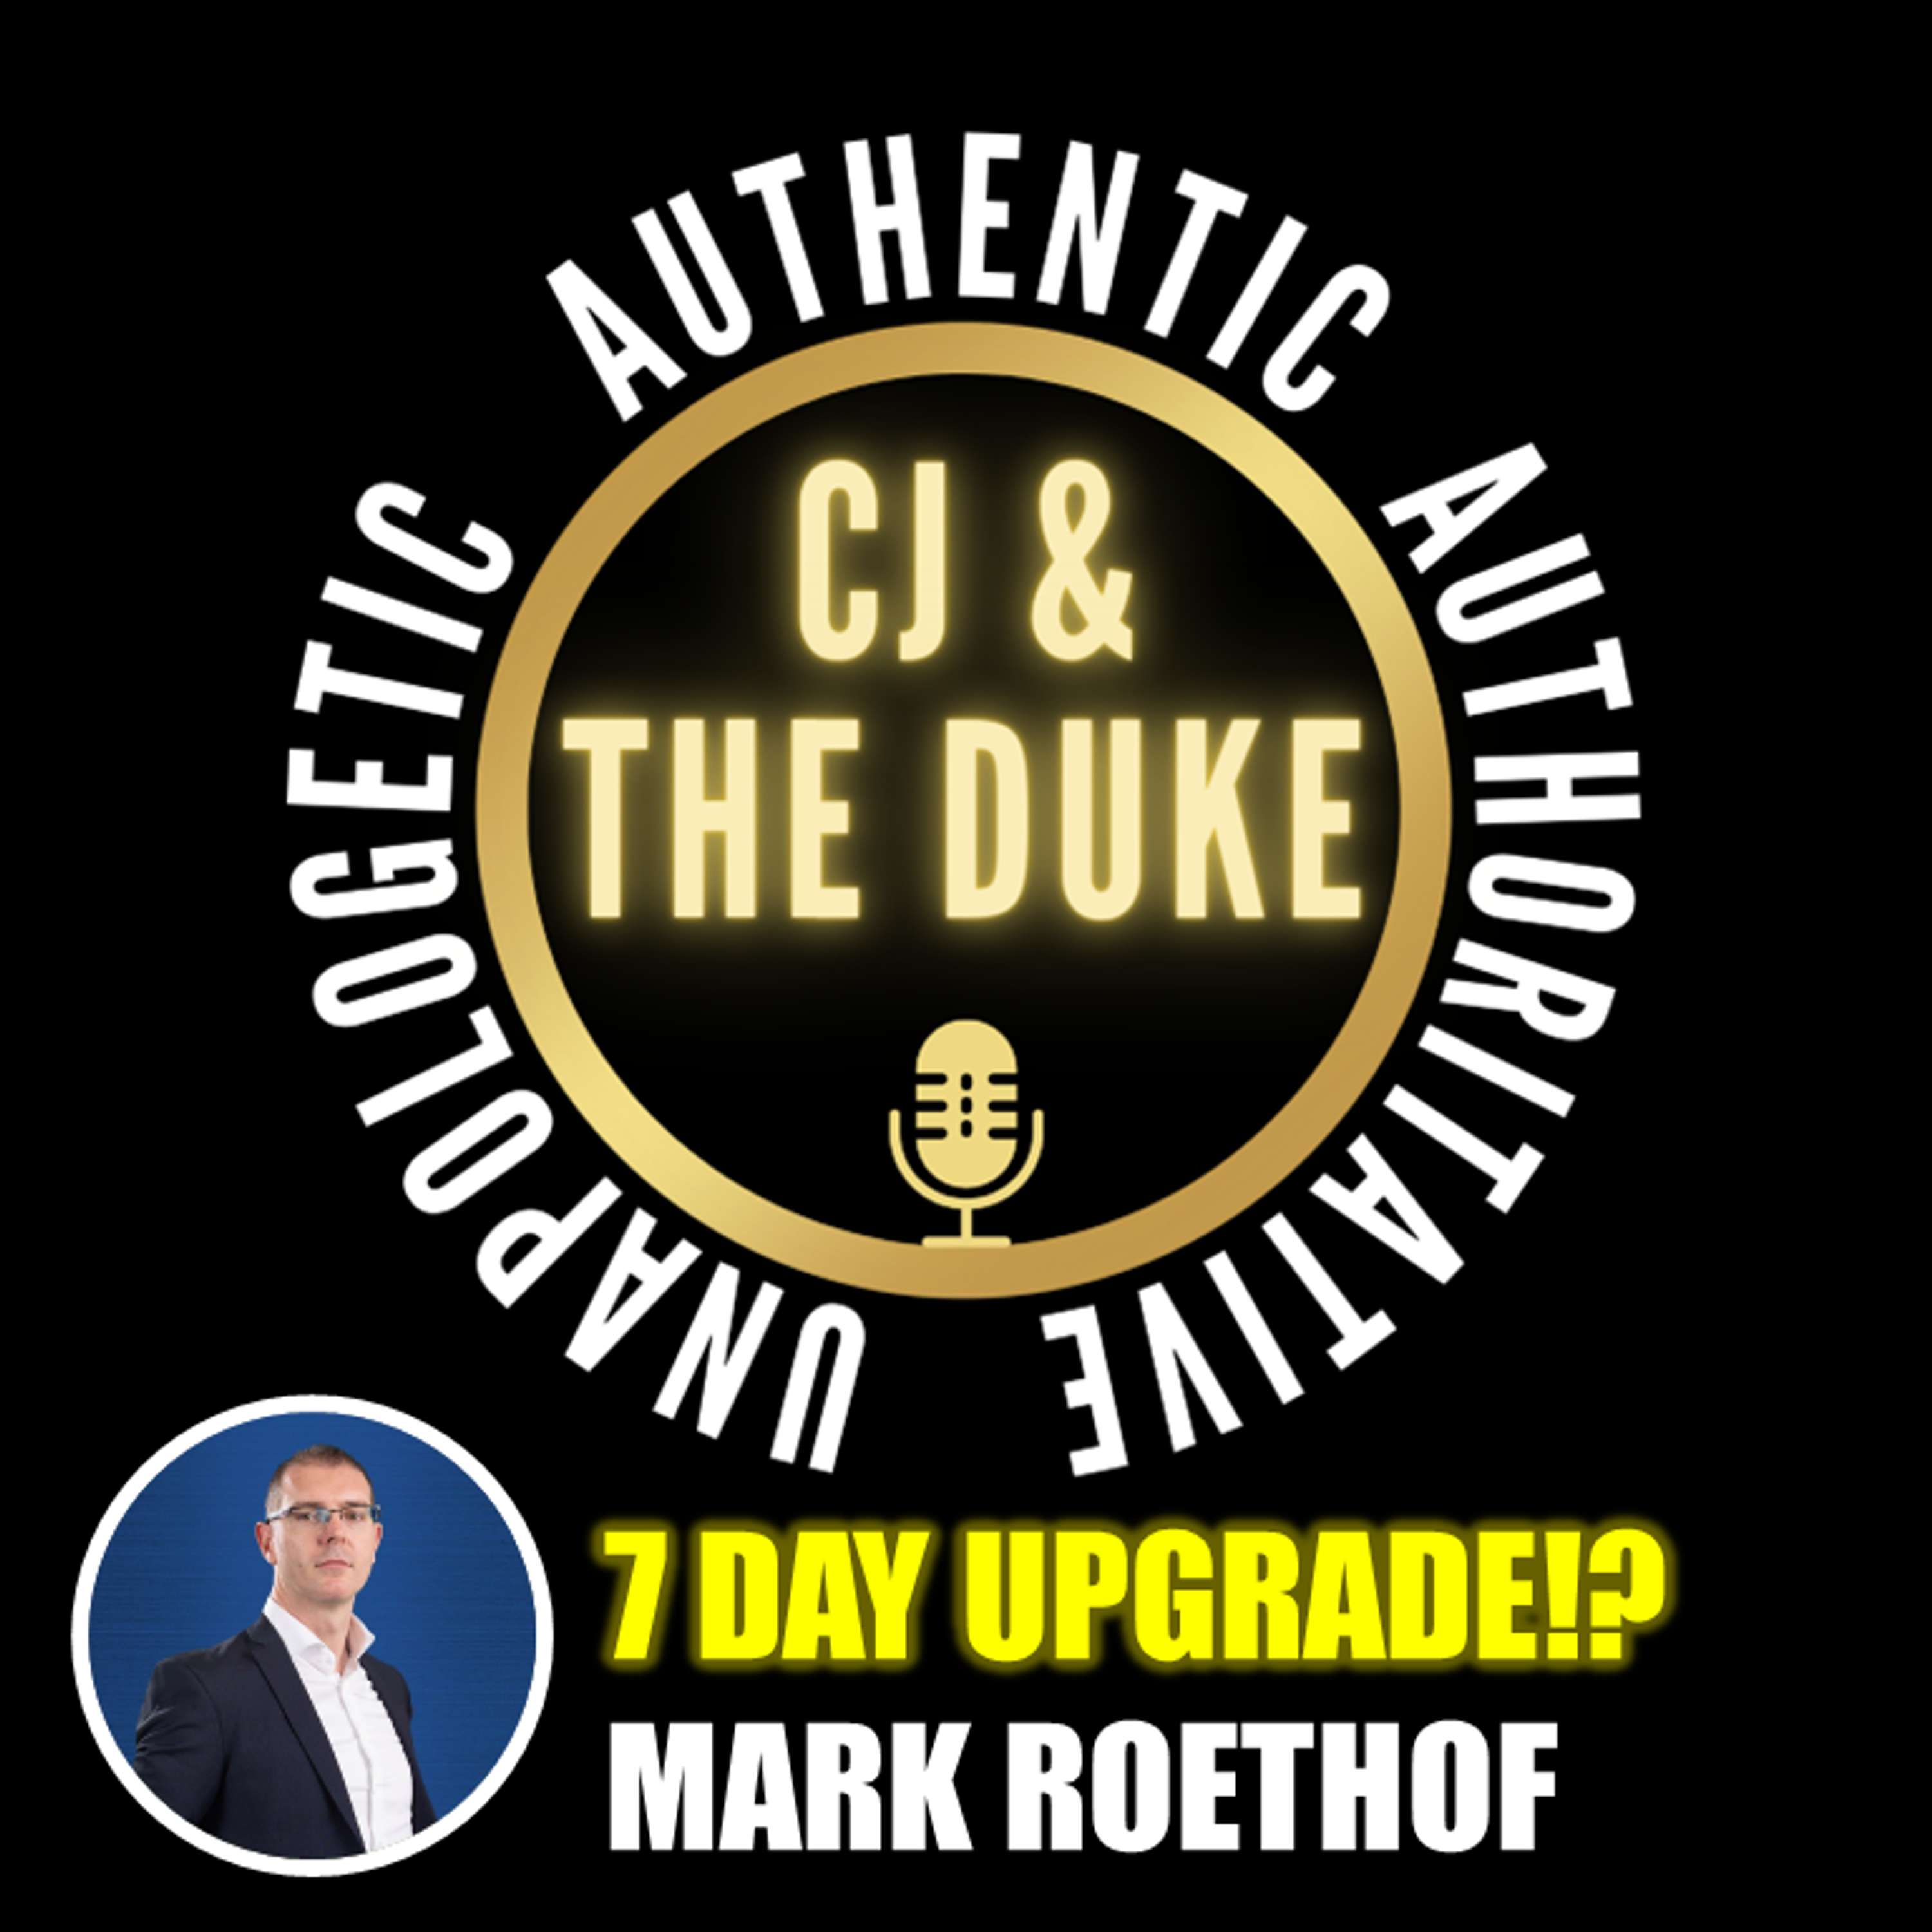 7 Day ServiceNow Upgrade?! (With Mark Roethof)